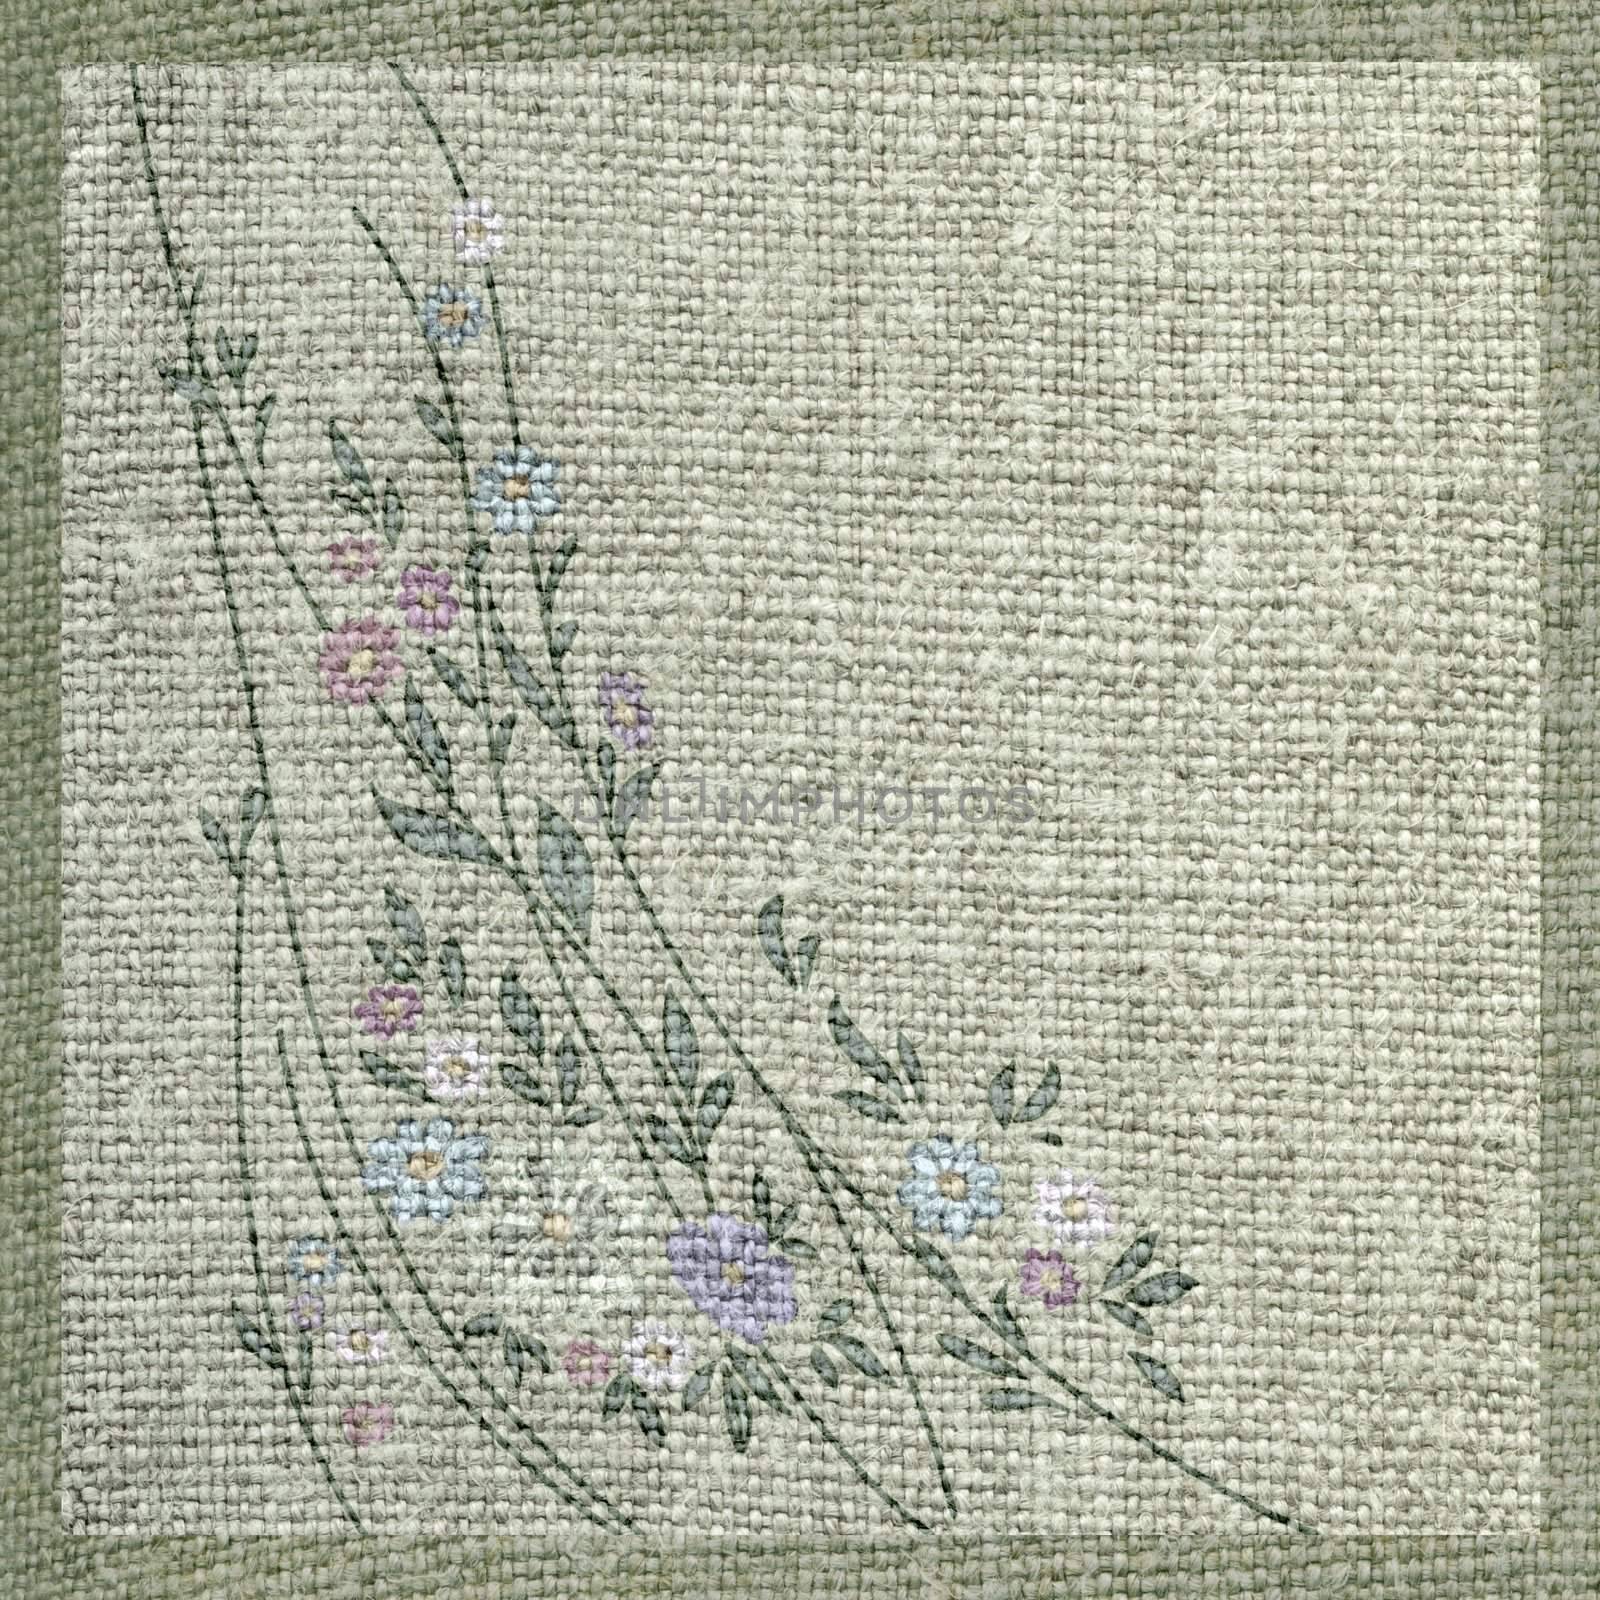 Artistic background, abstract flowers and leaves on a linen canvas